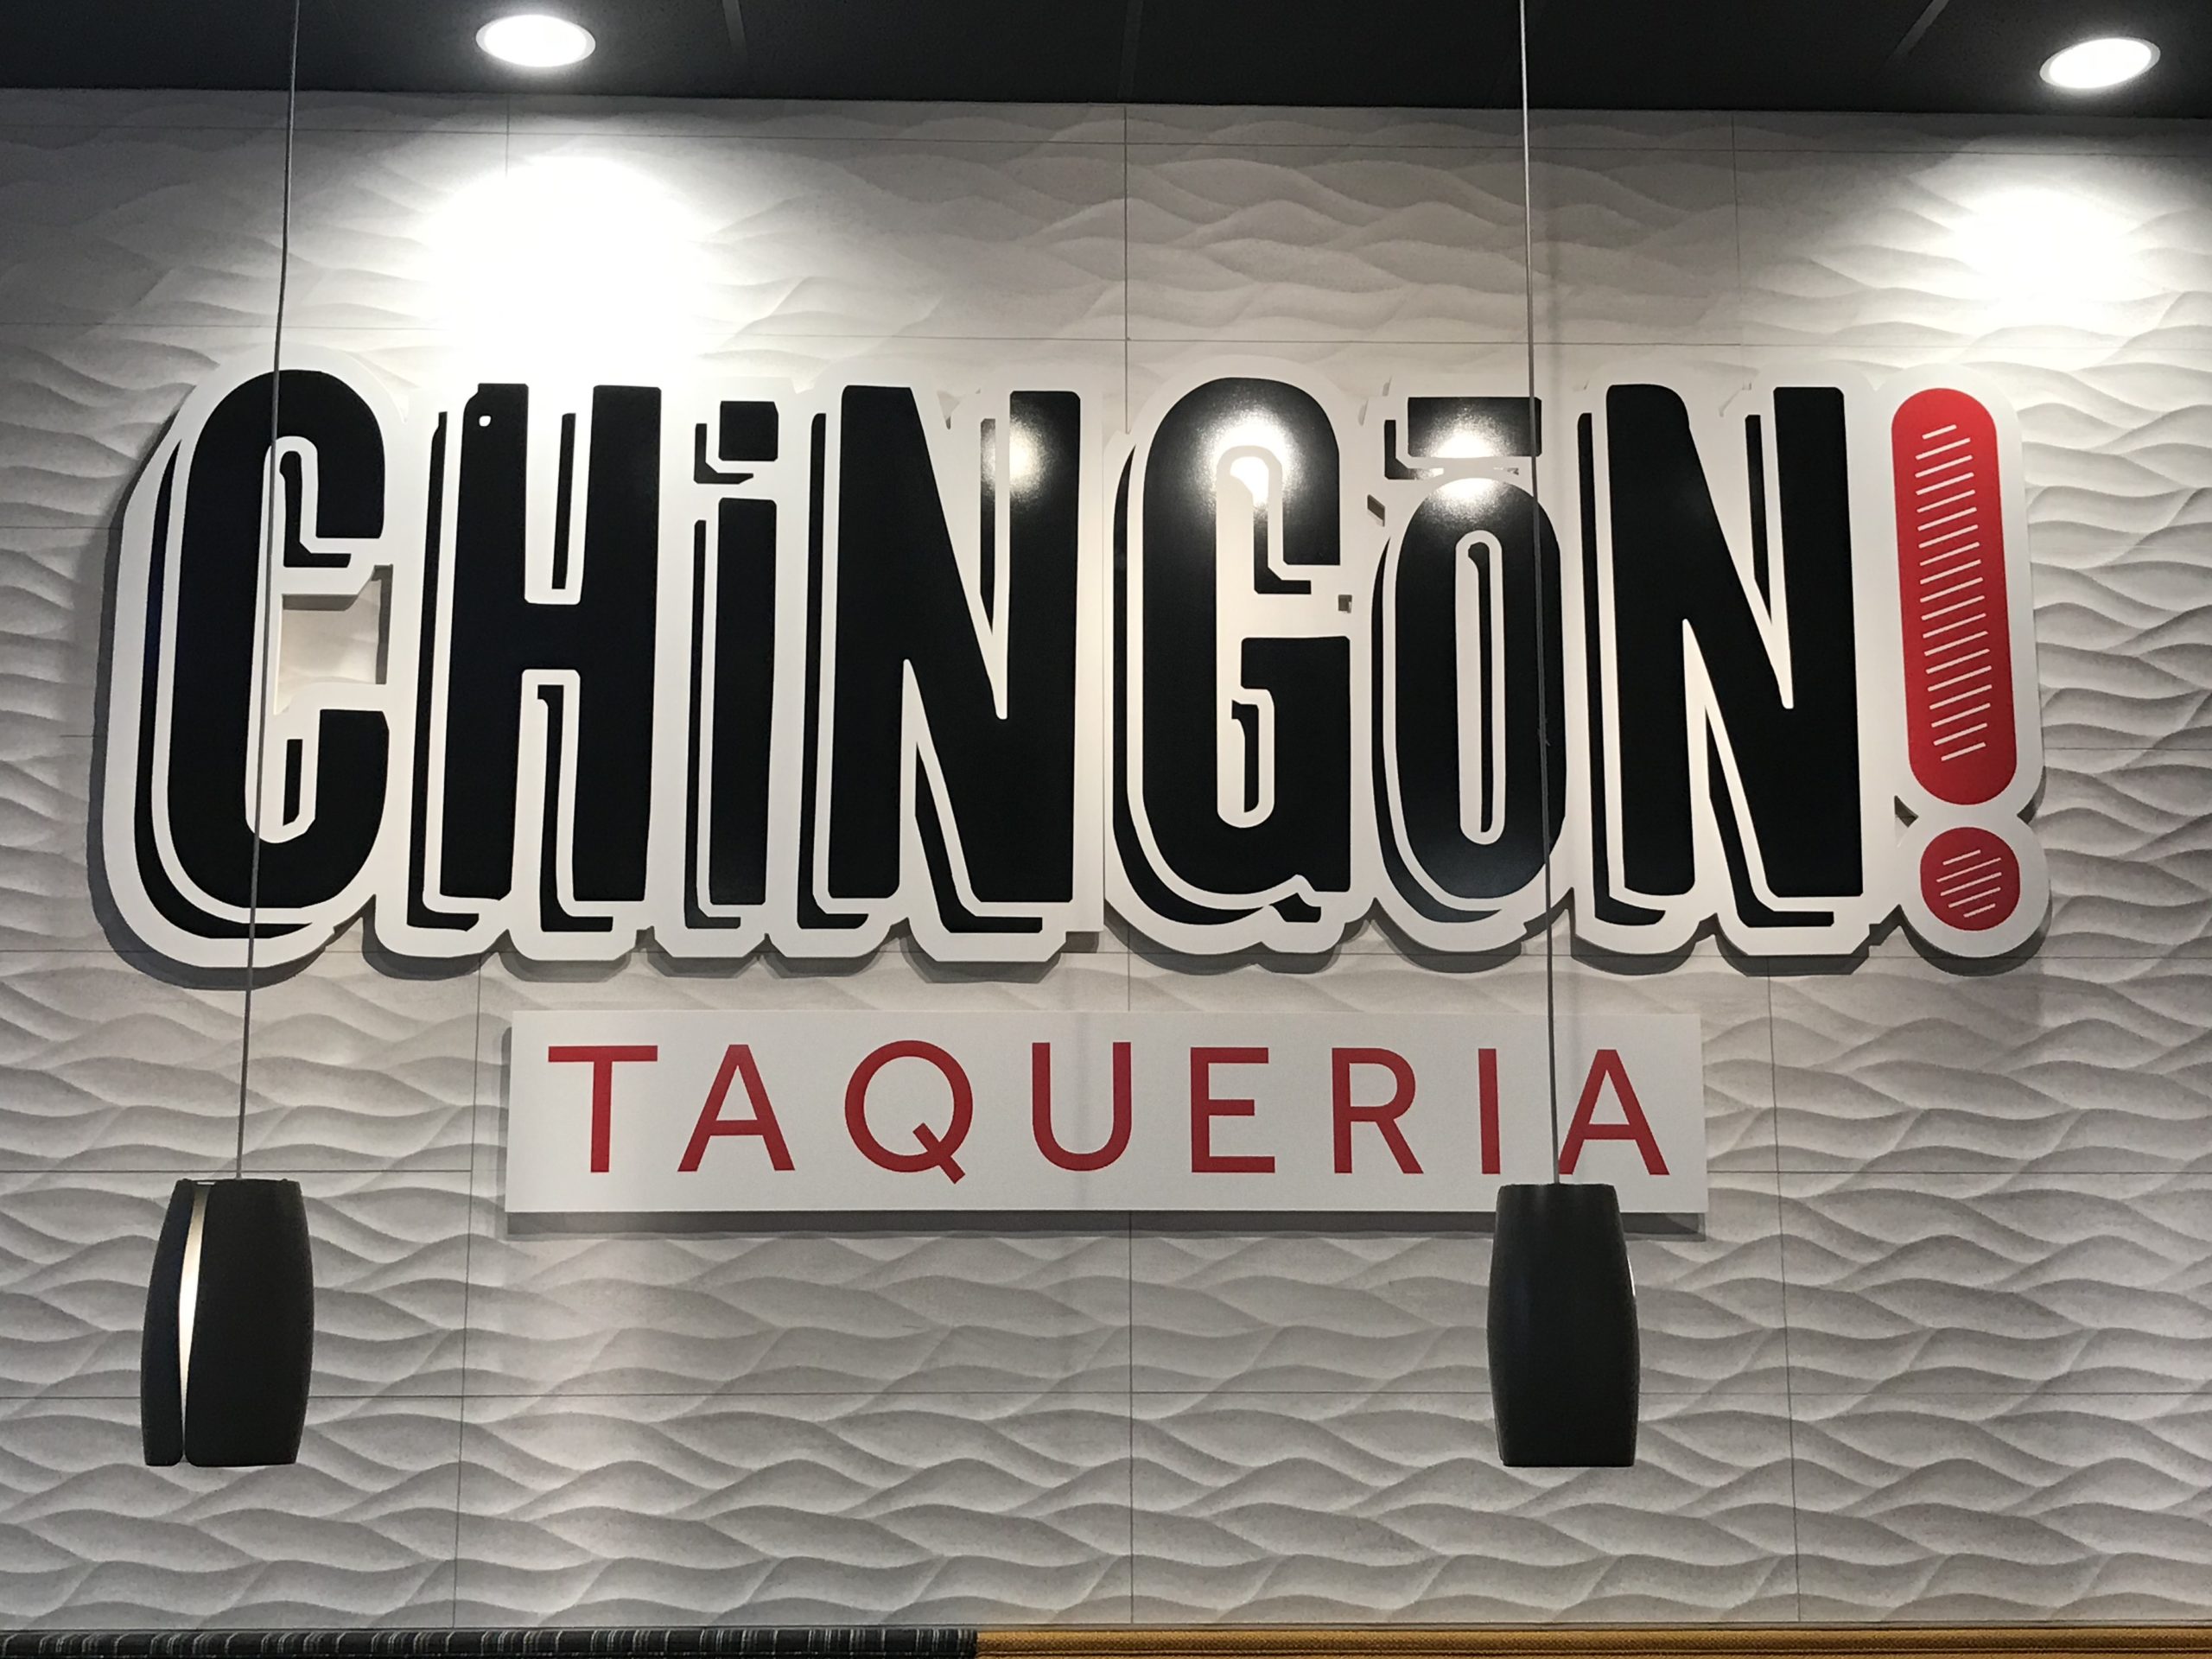 CHINGŌN! Taqueria: Awesome in Any Language